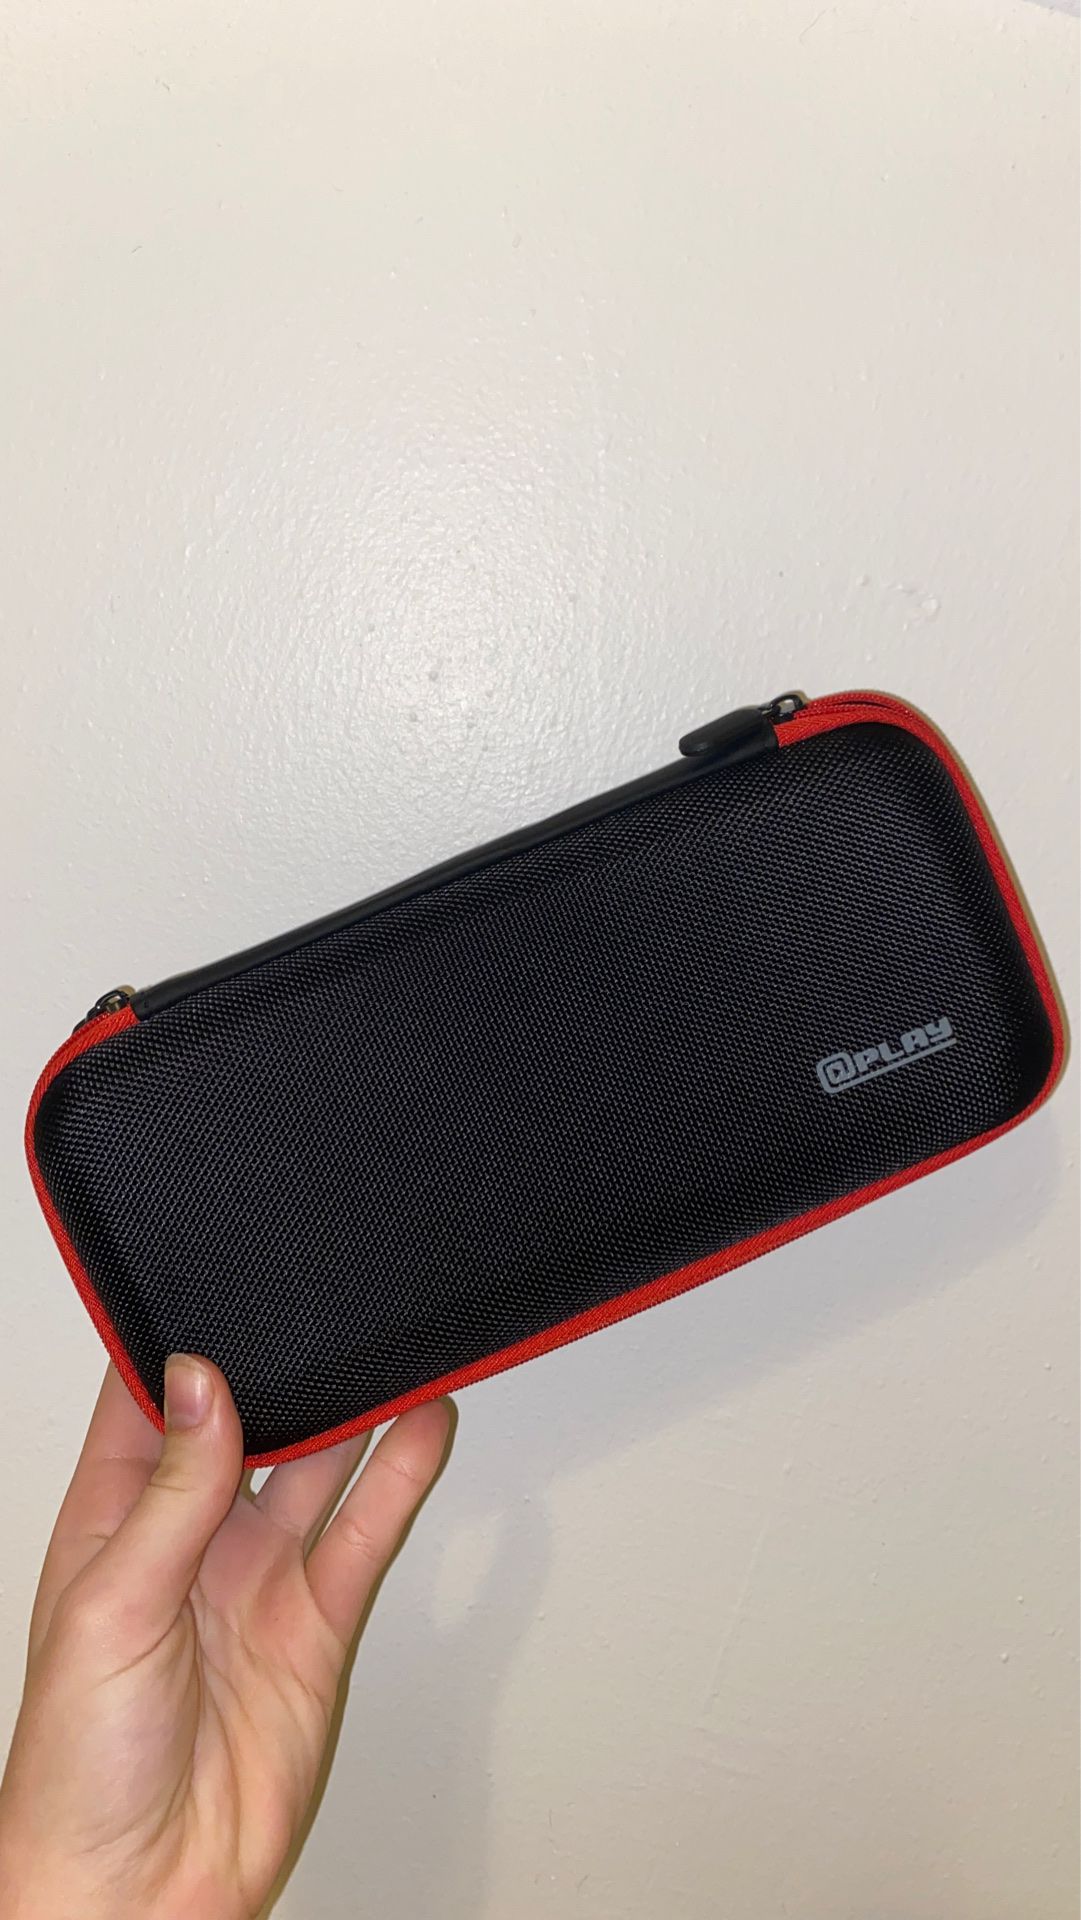 Nintendo Switch case with two games